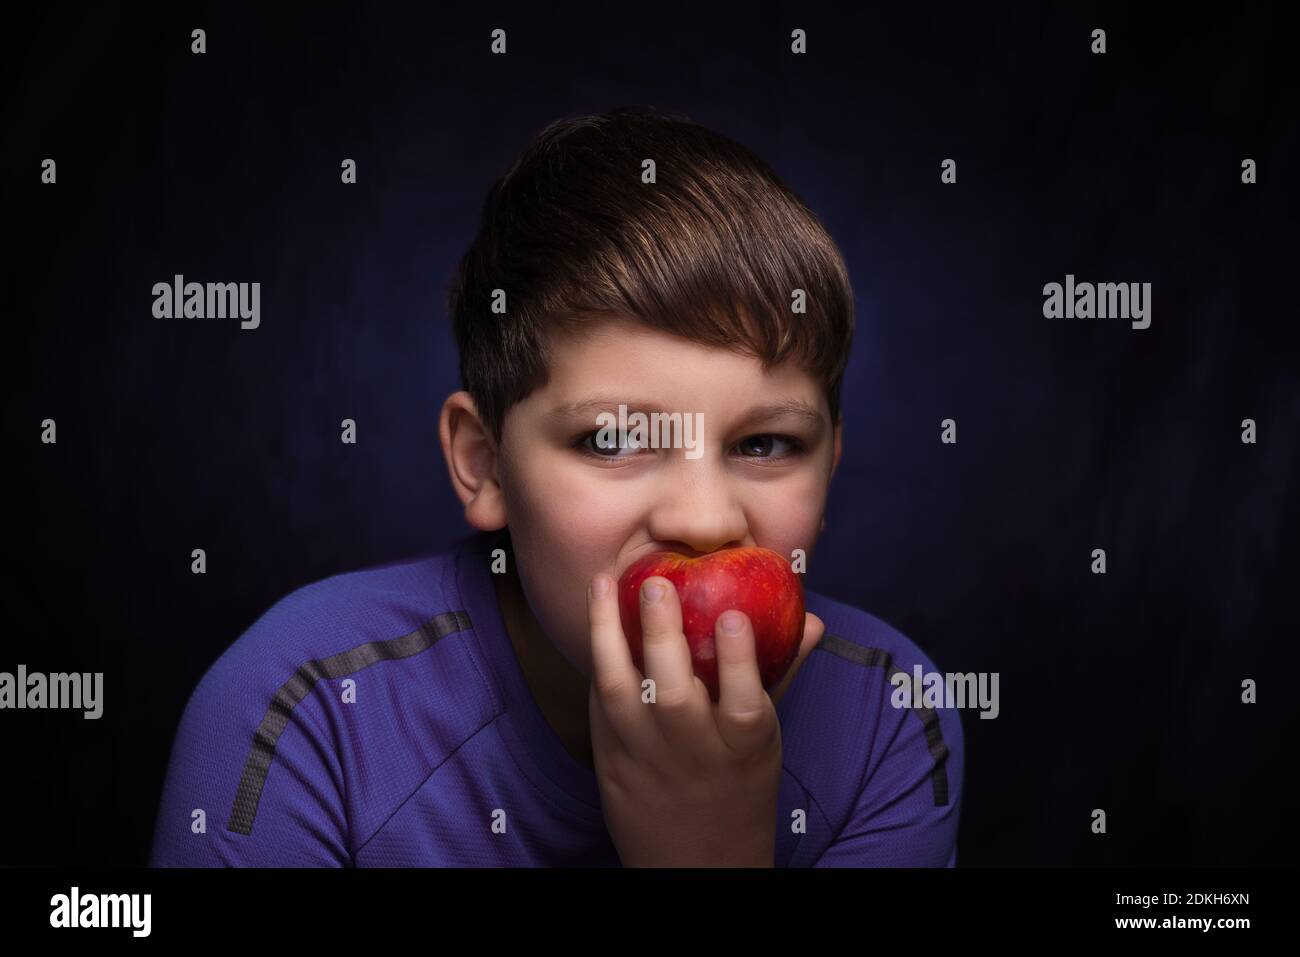 teenager boy with light brown hair and bangs, wearing a sports purple t-shirt eating a big red apple on an isolated background Stock Photo